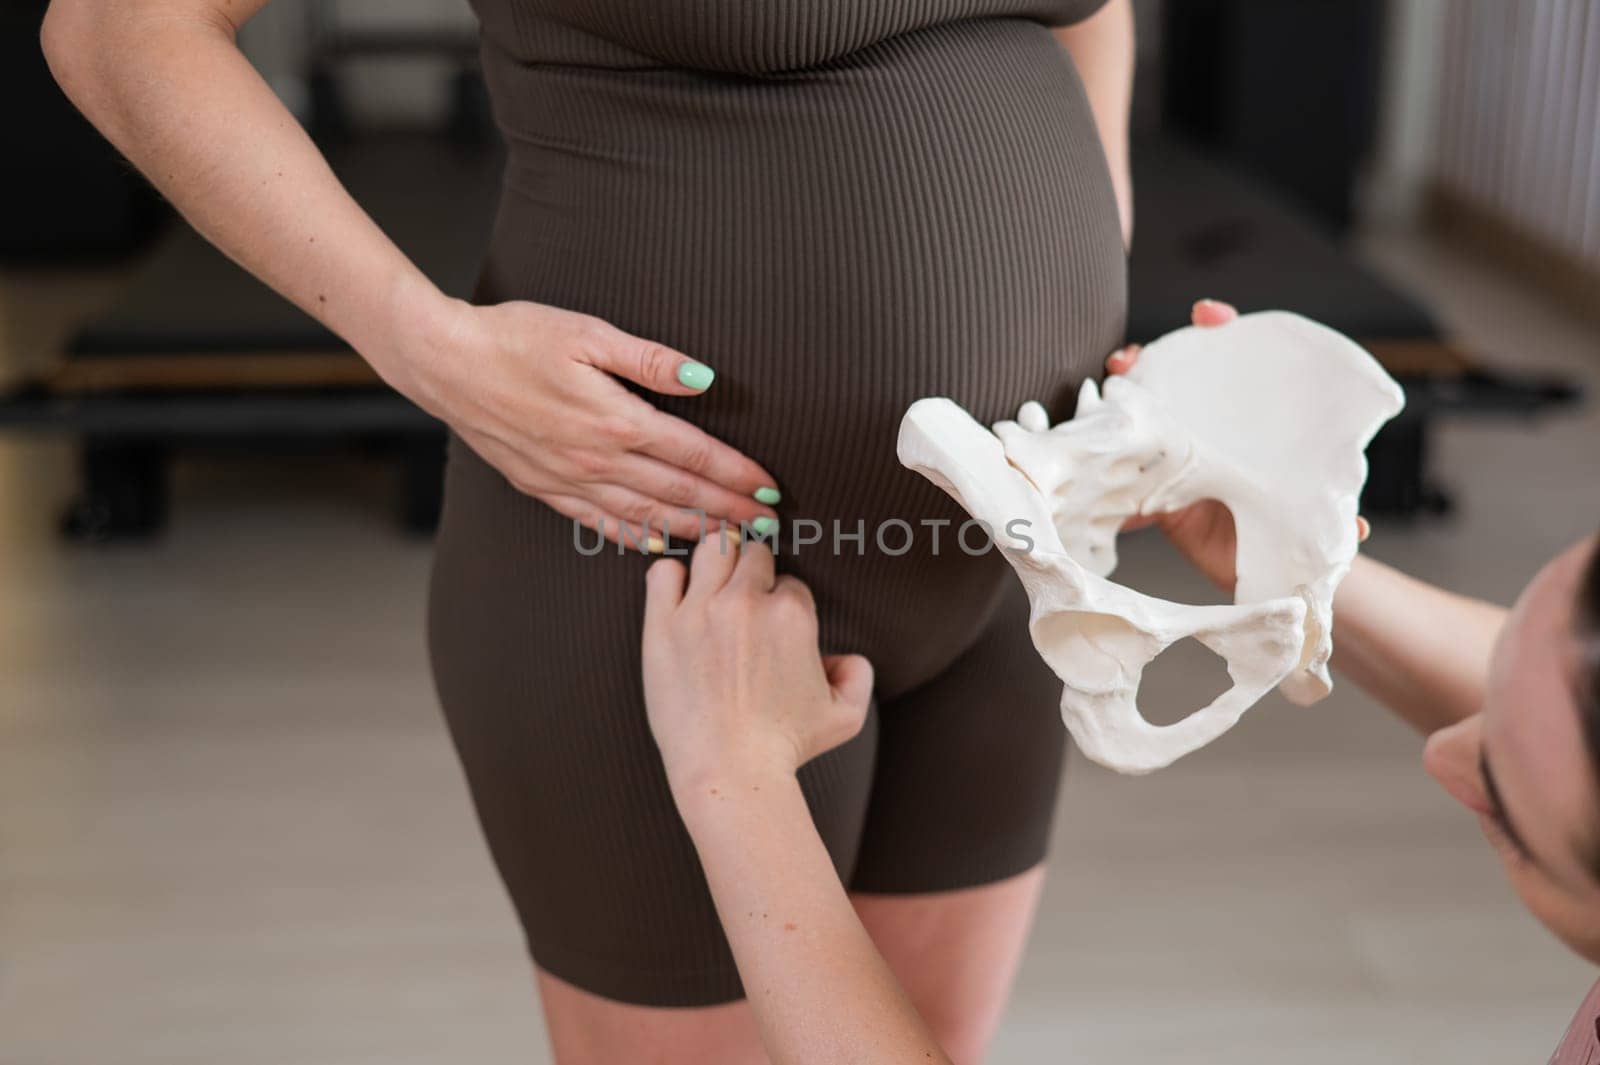 Doula explains the process of childbirth on a sample of the pelvis of a pregnant woman